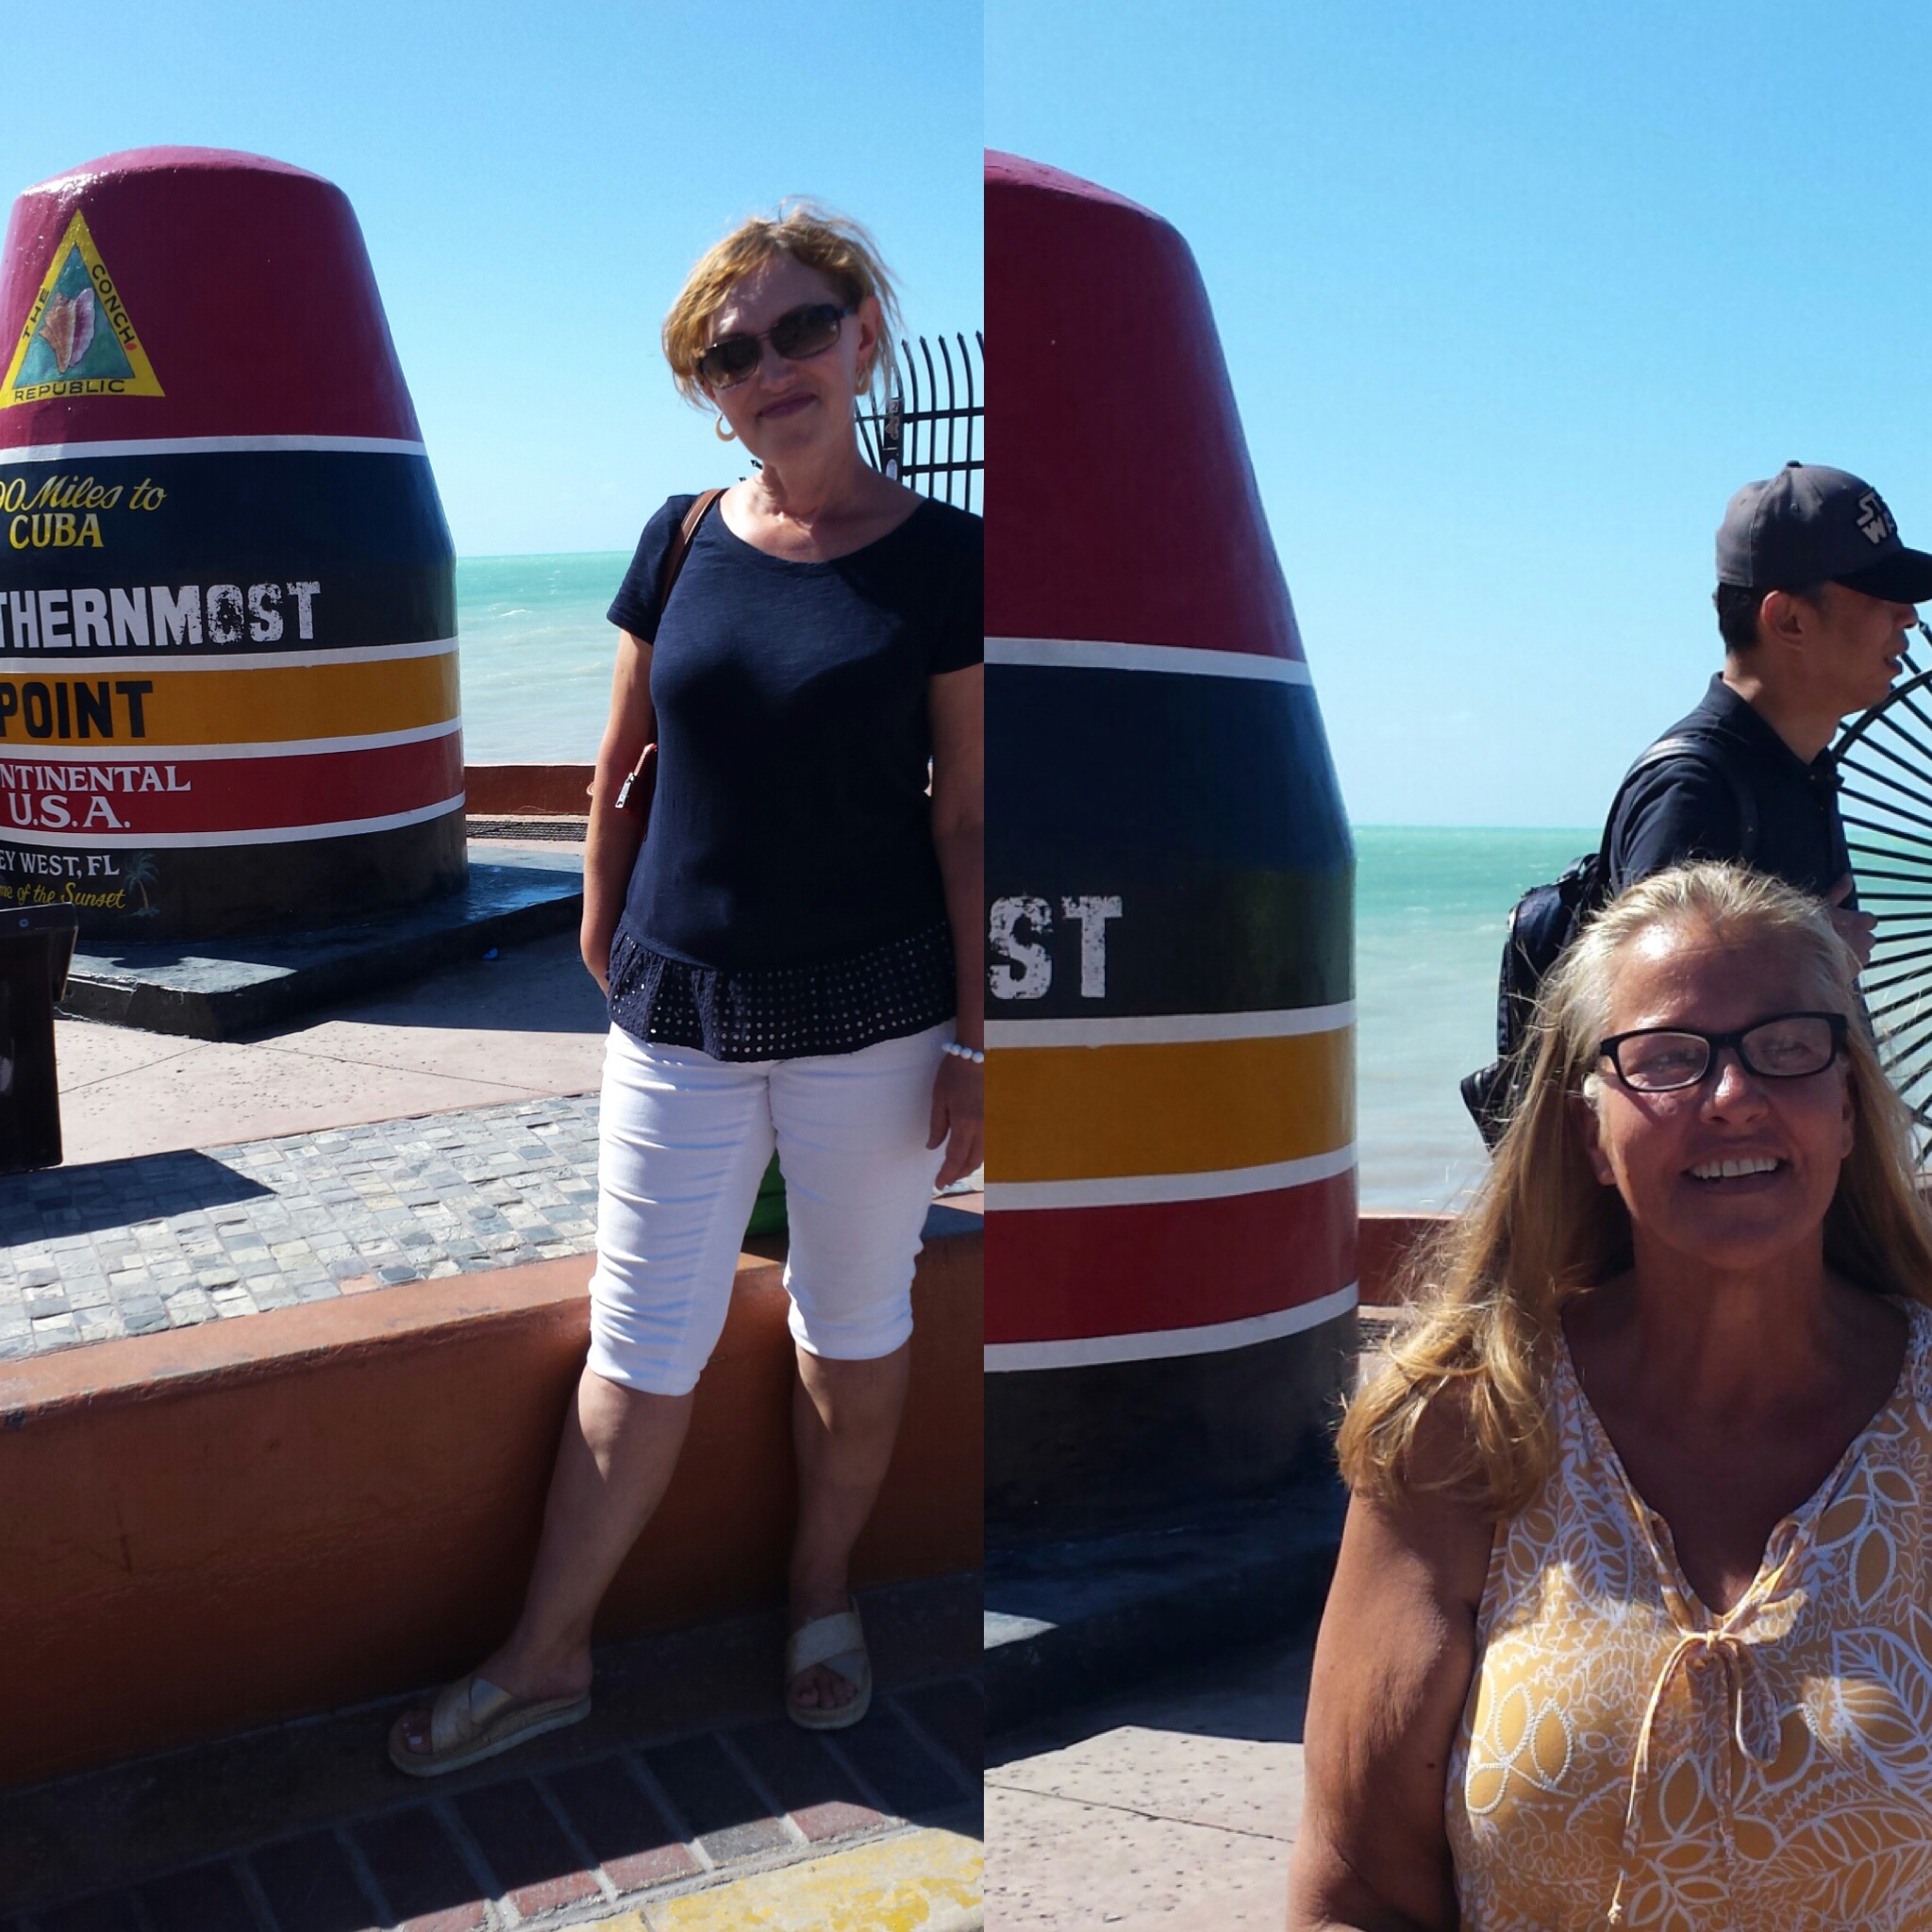 Elena and Michele at the "Southernmost Point"